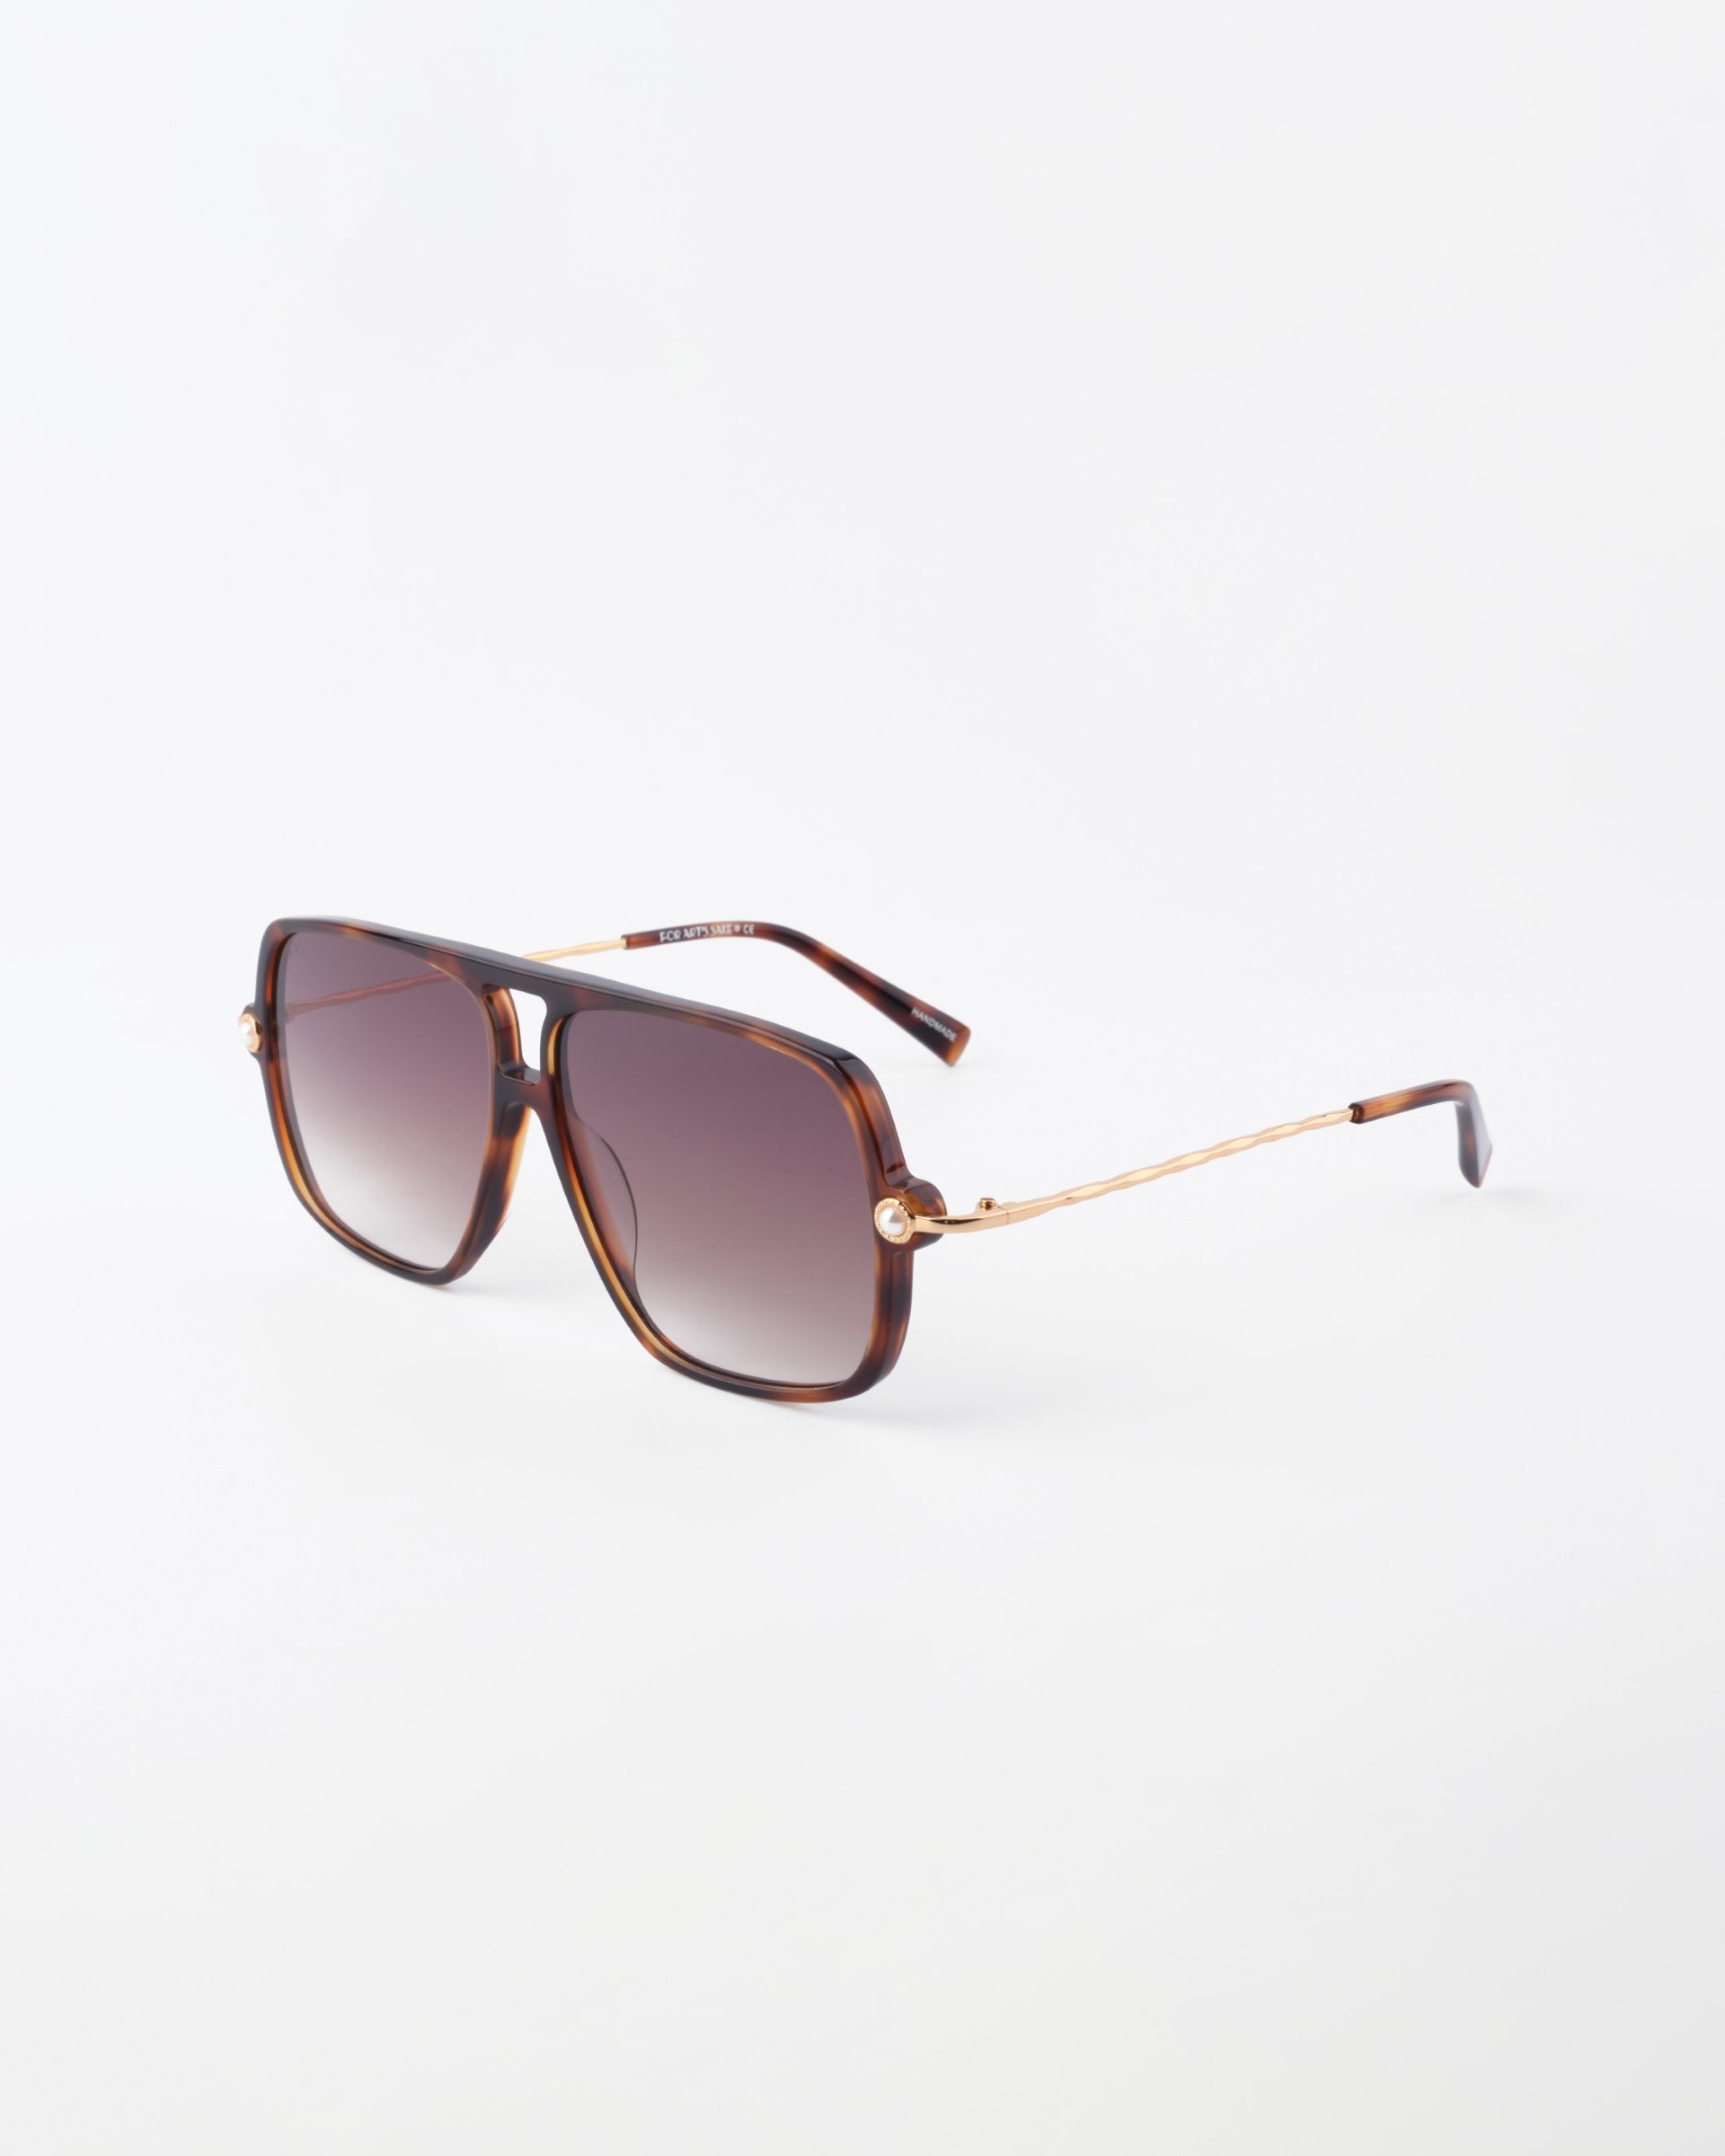 A pair of Cinnamon sunglasses by For Art&#39;s Sake® with a brown tortoiseshell frame and dark gradient lenses. The slim arms feature a gold metallic accent near the hinges, resembling 18-karat gold-plated elegance.